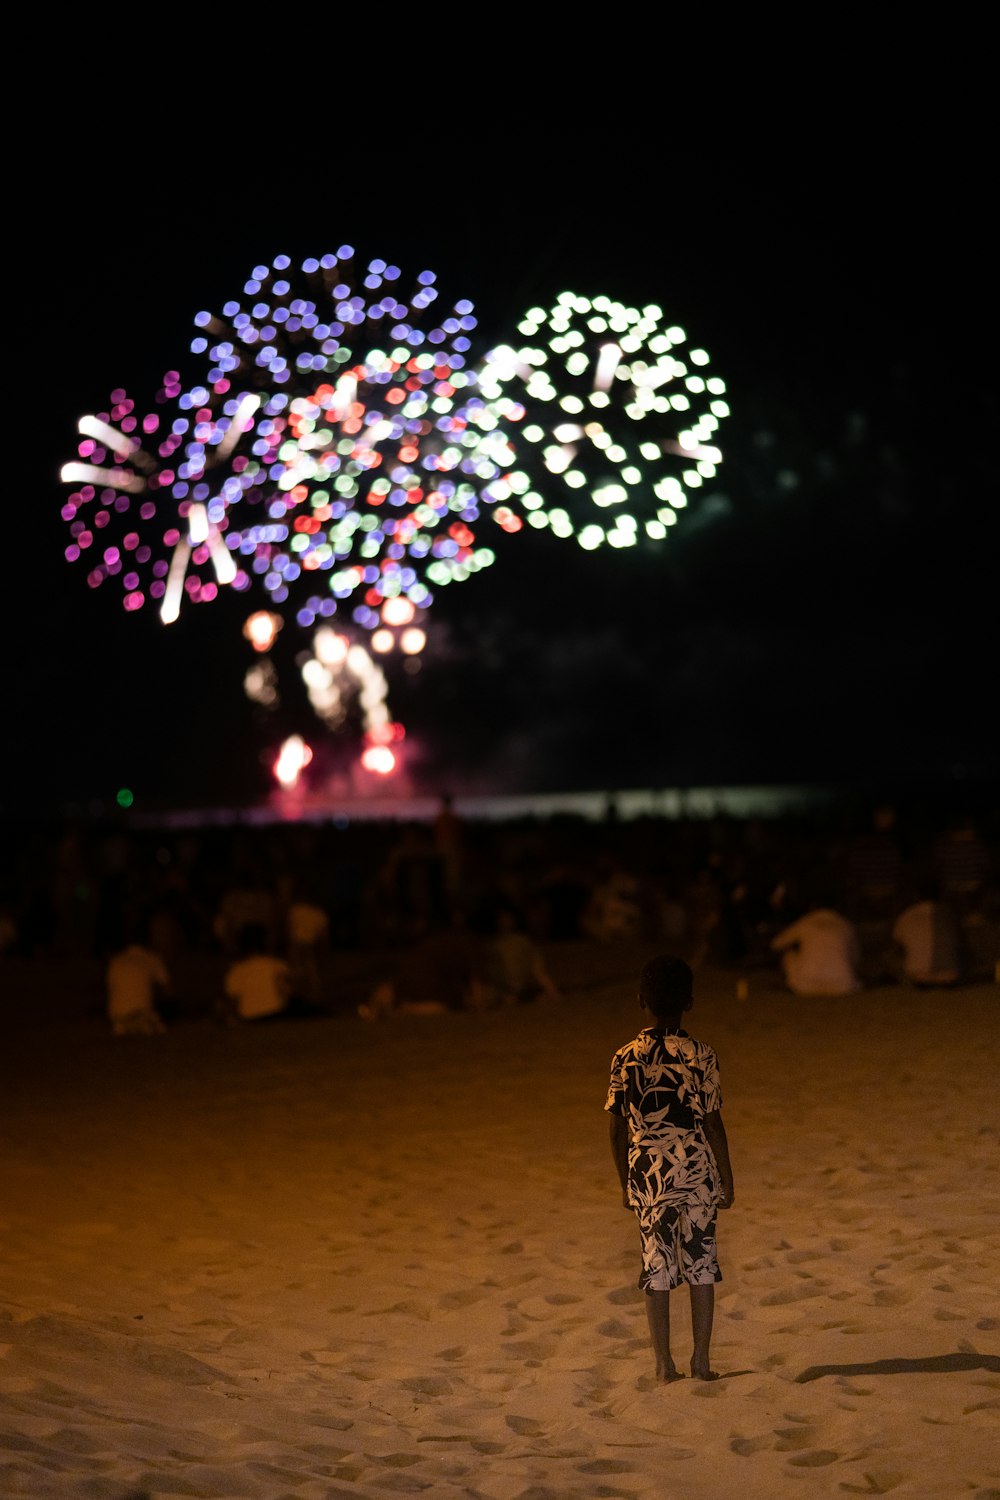 a person standing in front of a large fireworks display